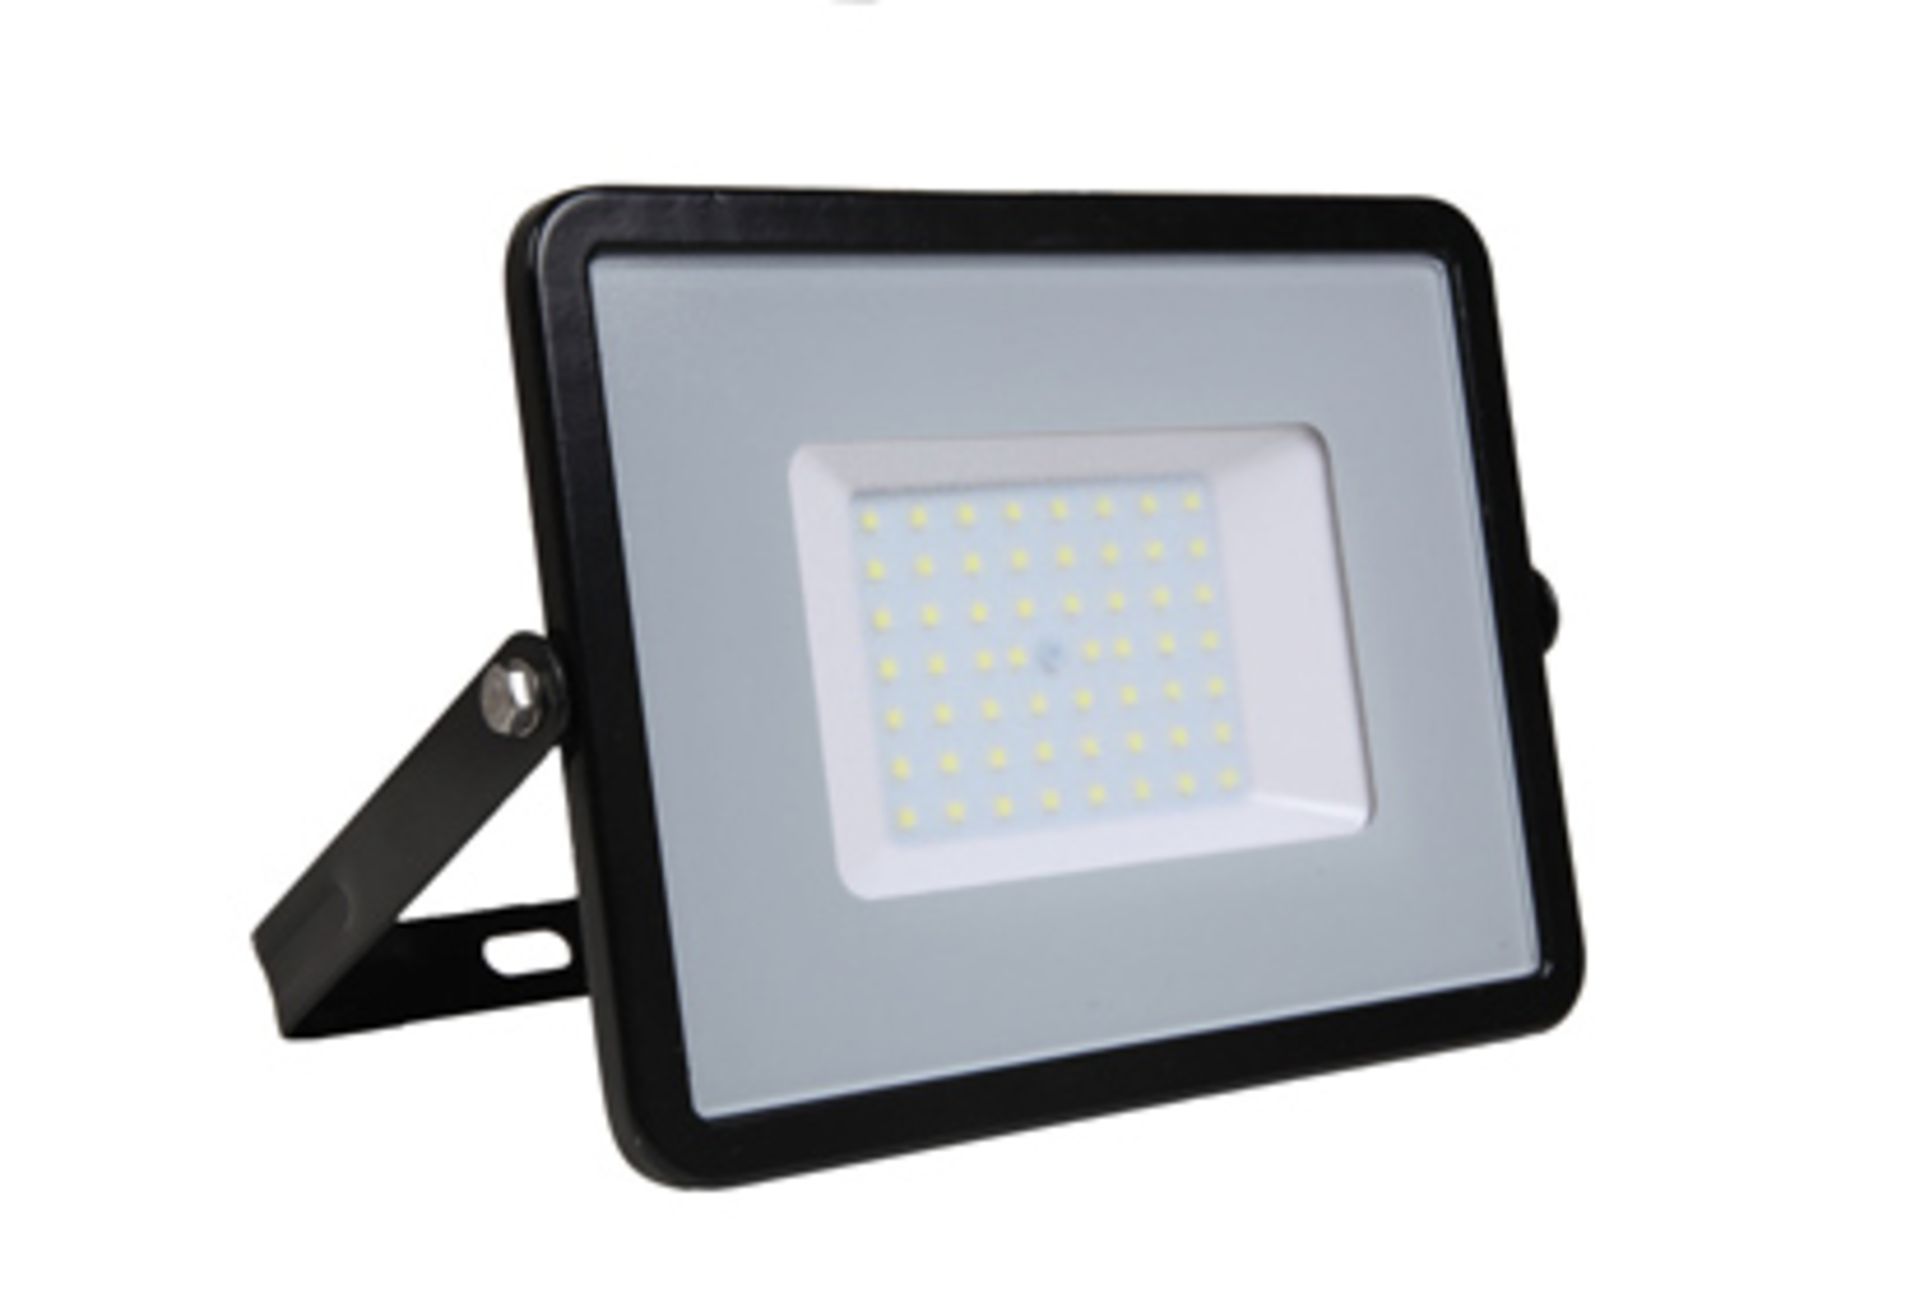 Approx 60 50w Floodlights, black, product code T4FLV4000B - Image 3 of 4